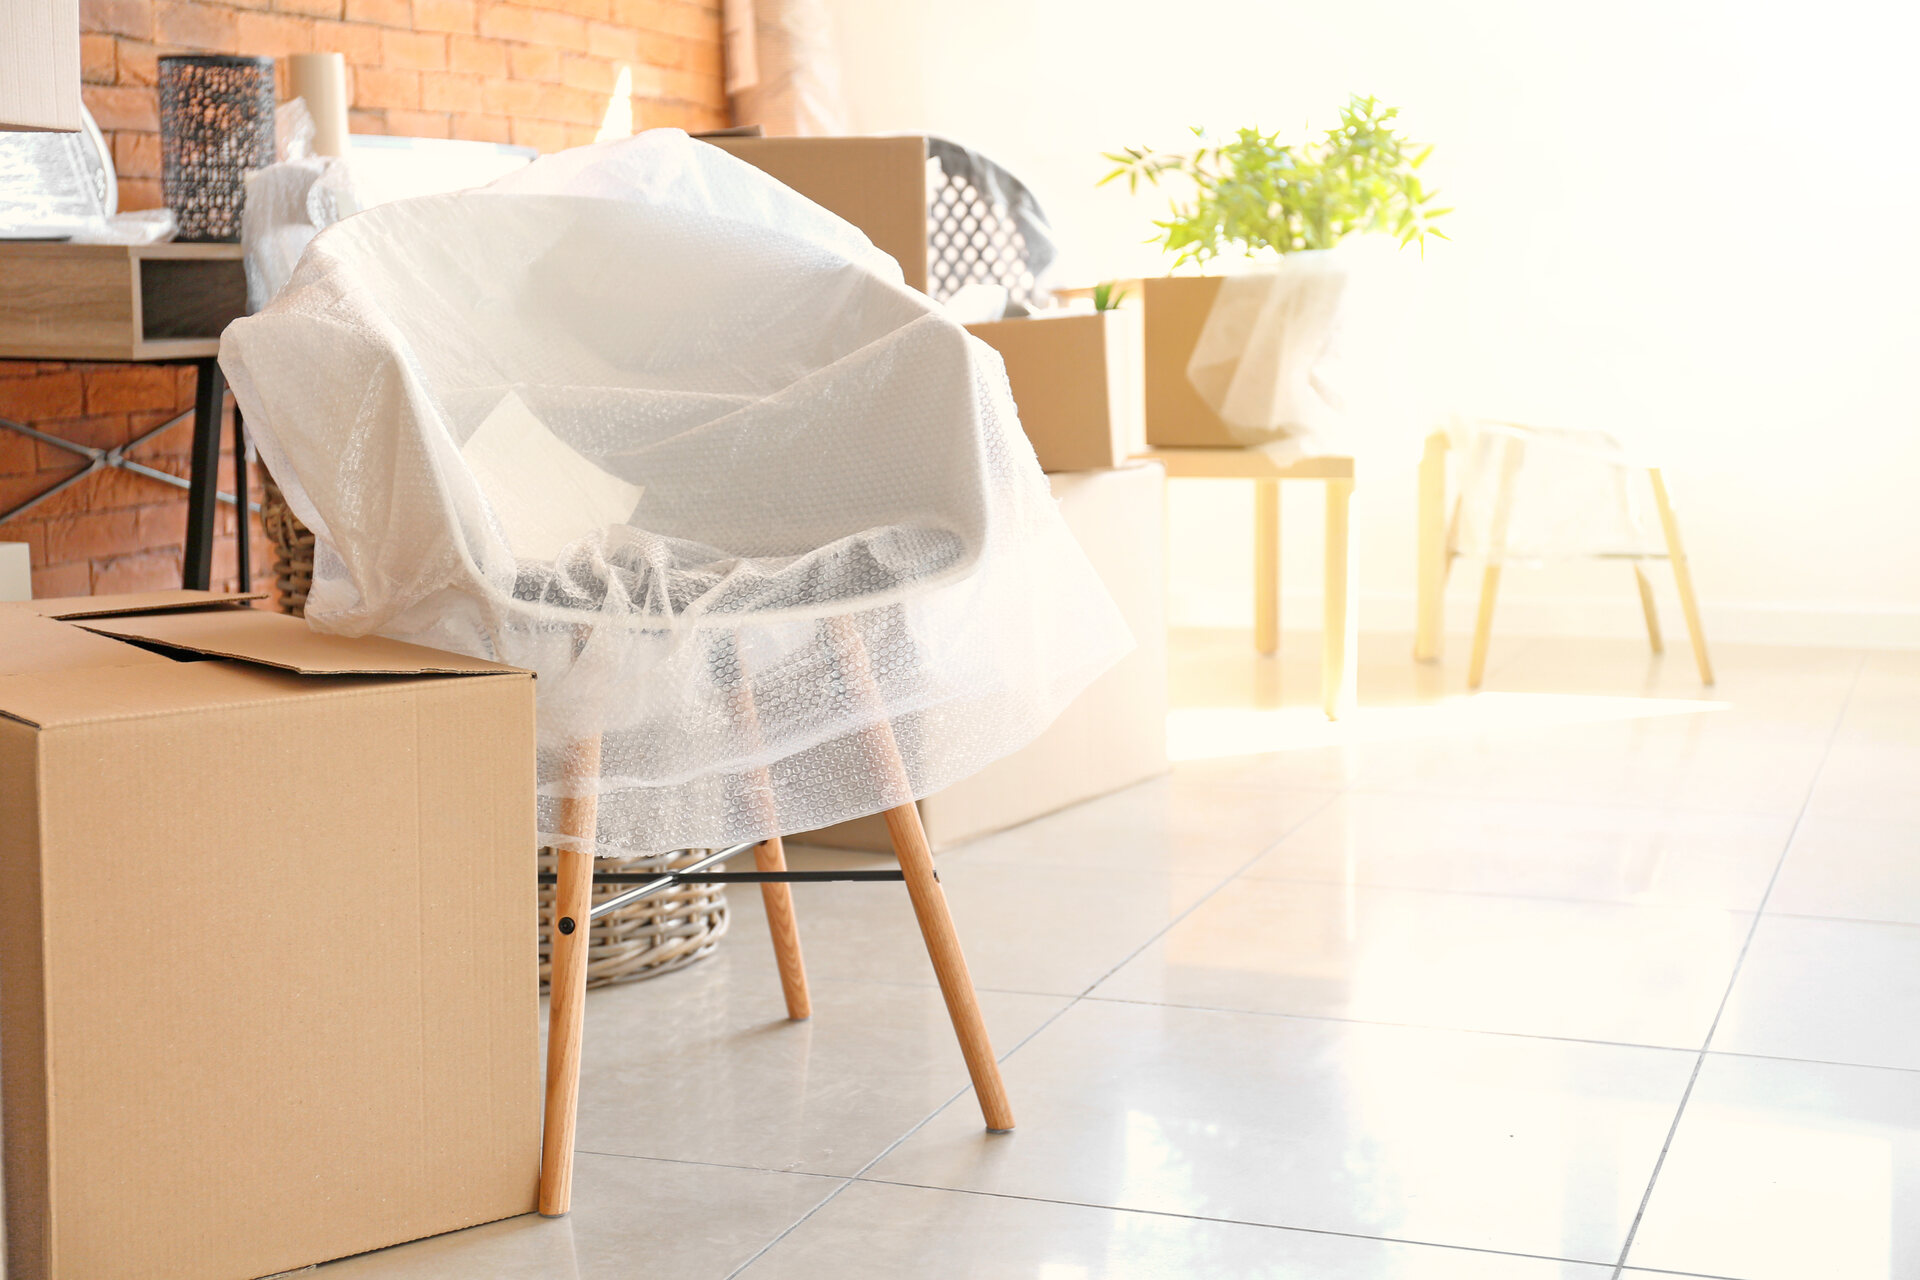 Chair wrapped in plastic wrap, surrounded by boxes for moving overseas